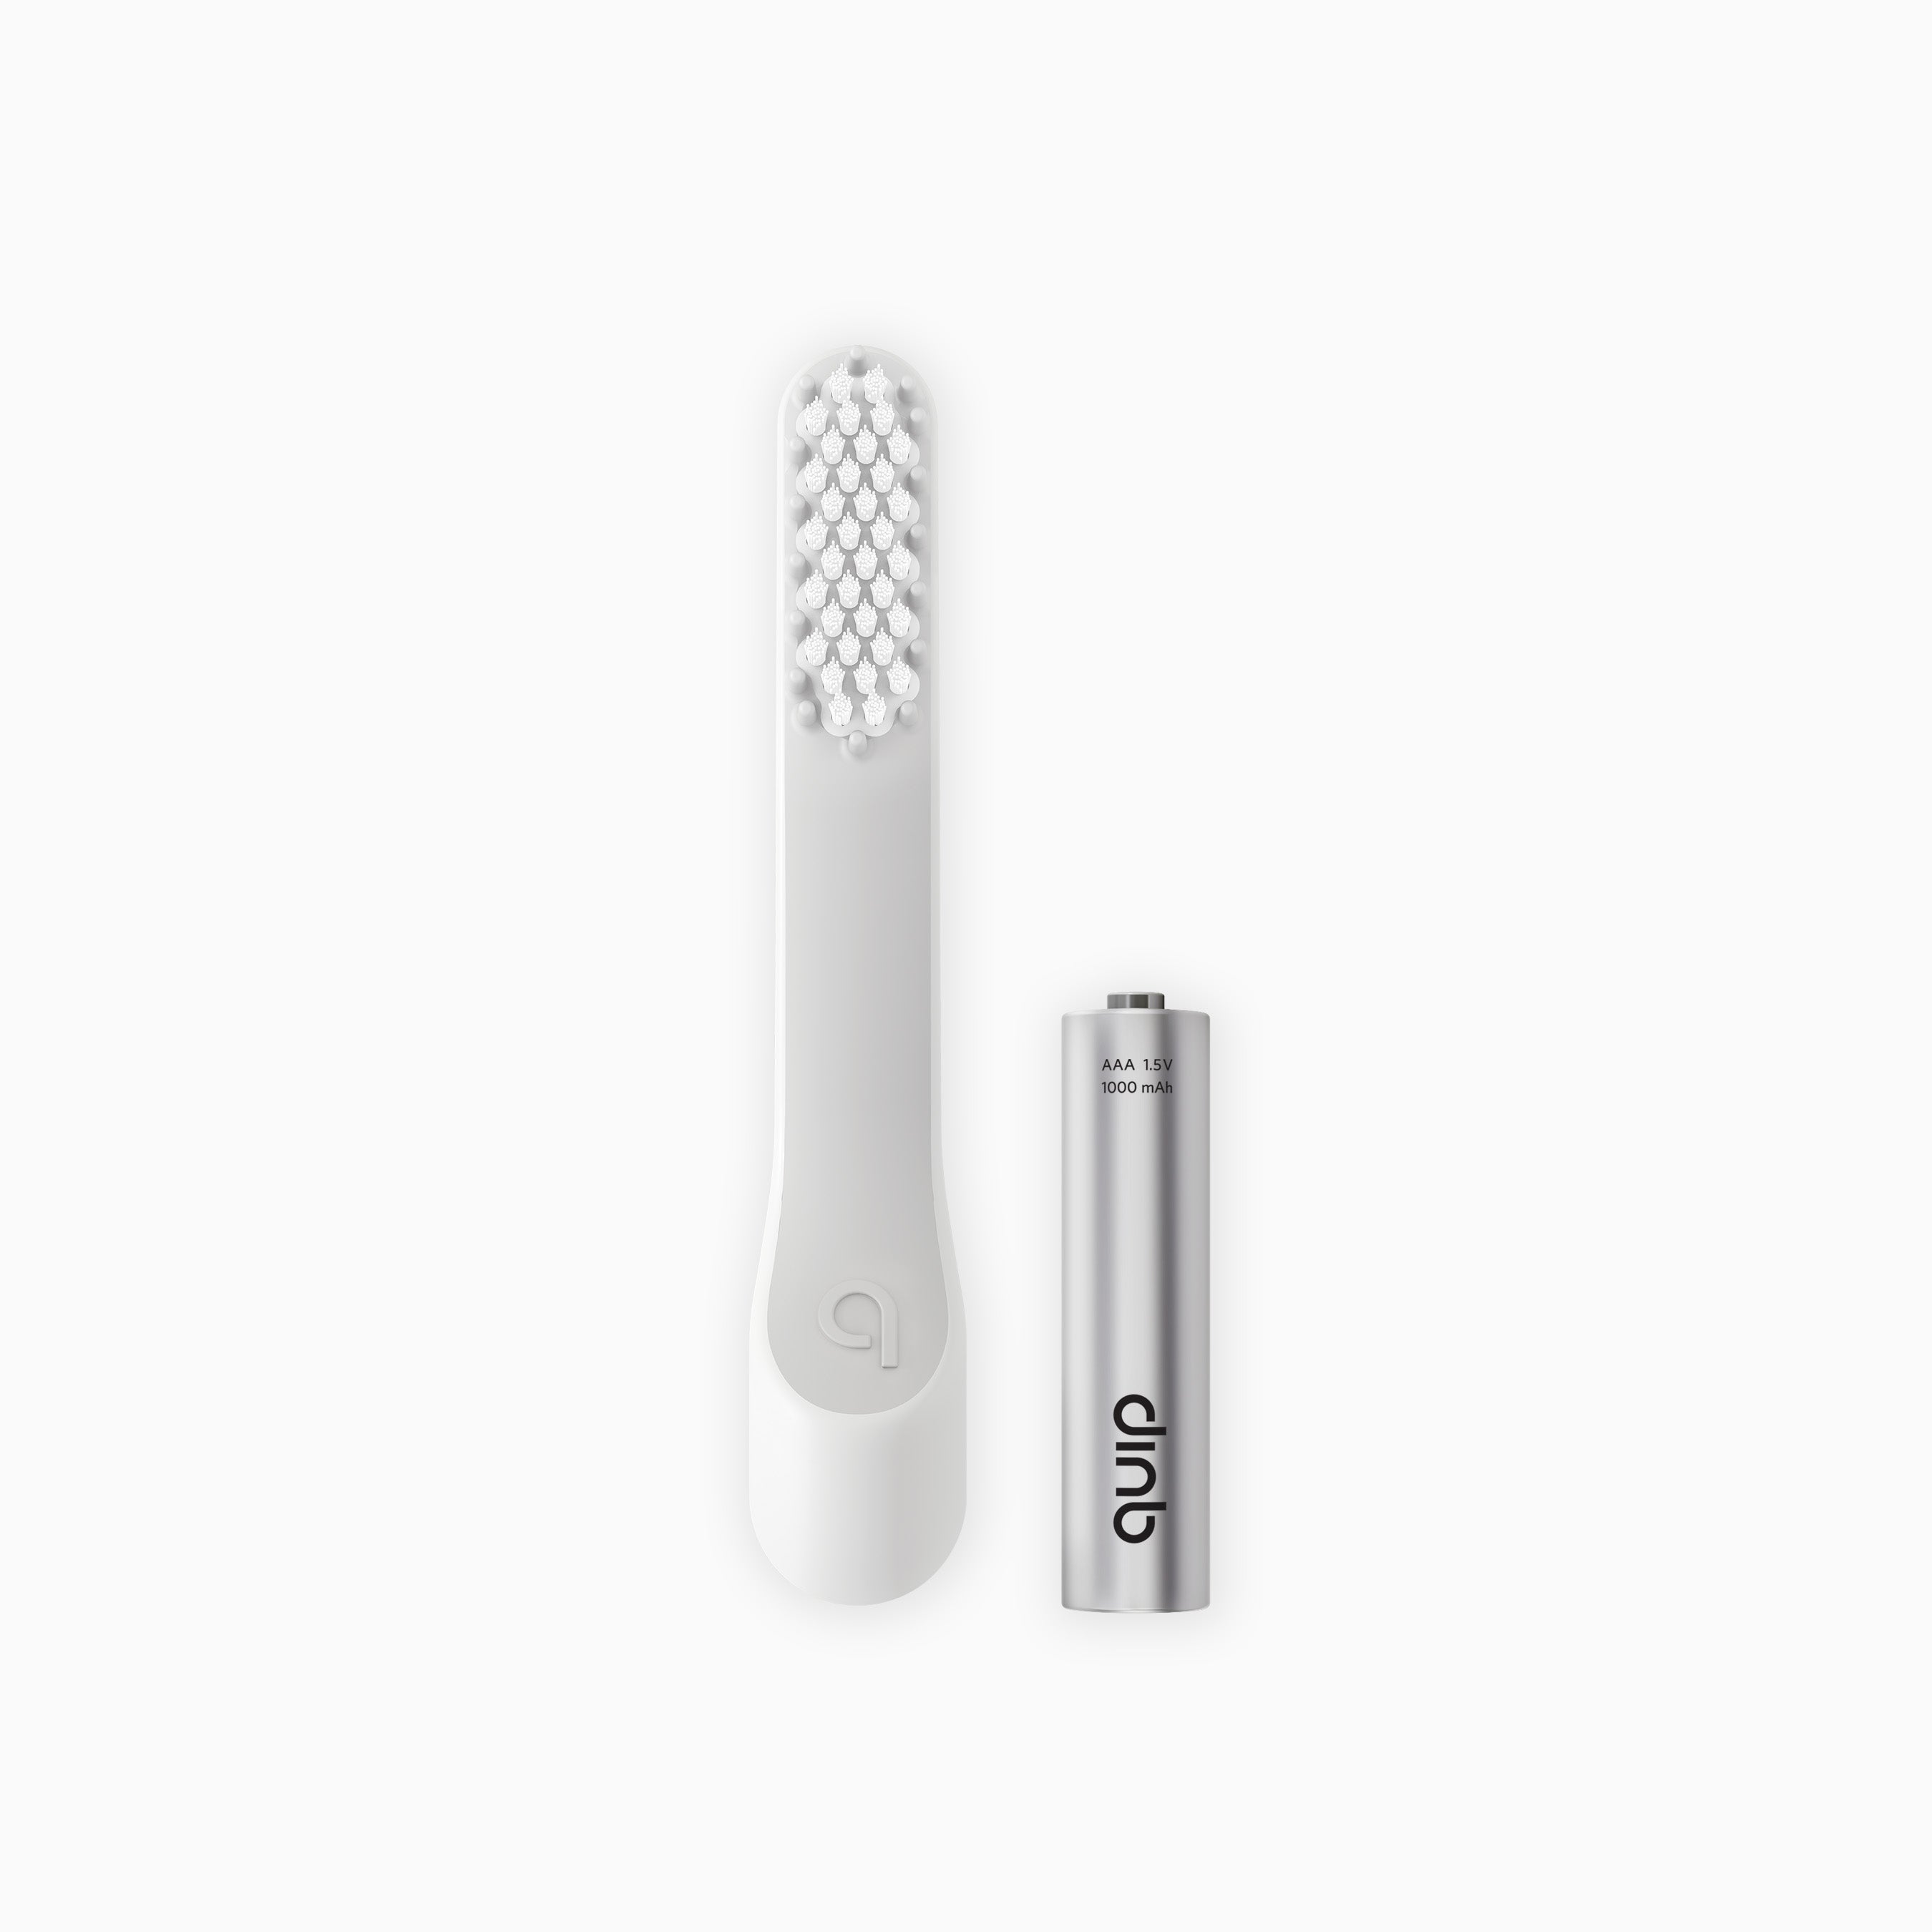 Standard Electric Toothbrush Head Refill